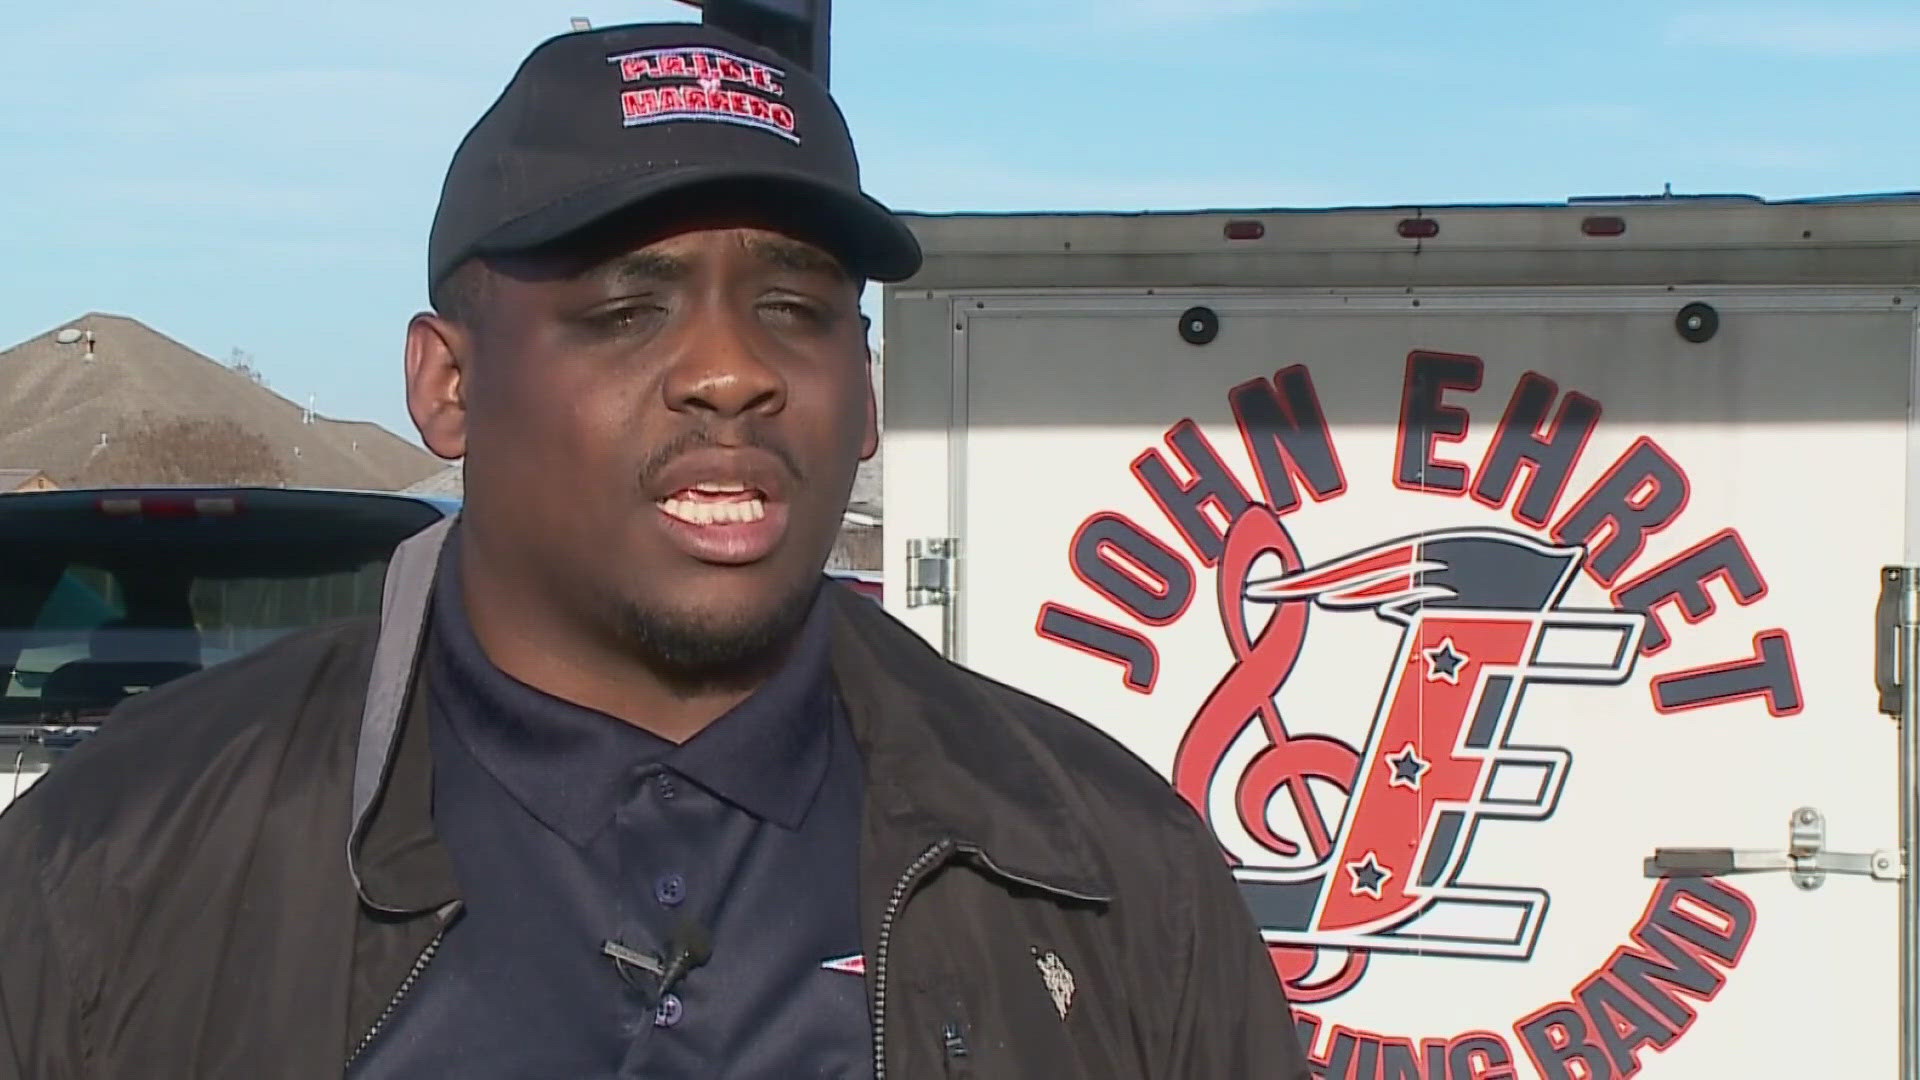 The John Ehret HS band community is mourning a tragic, seemingly sudden loss. The Jefferson Parish school system confirms that band director Marvin Haywood has died.